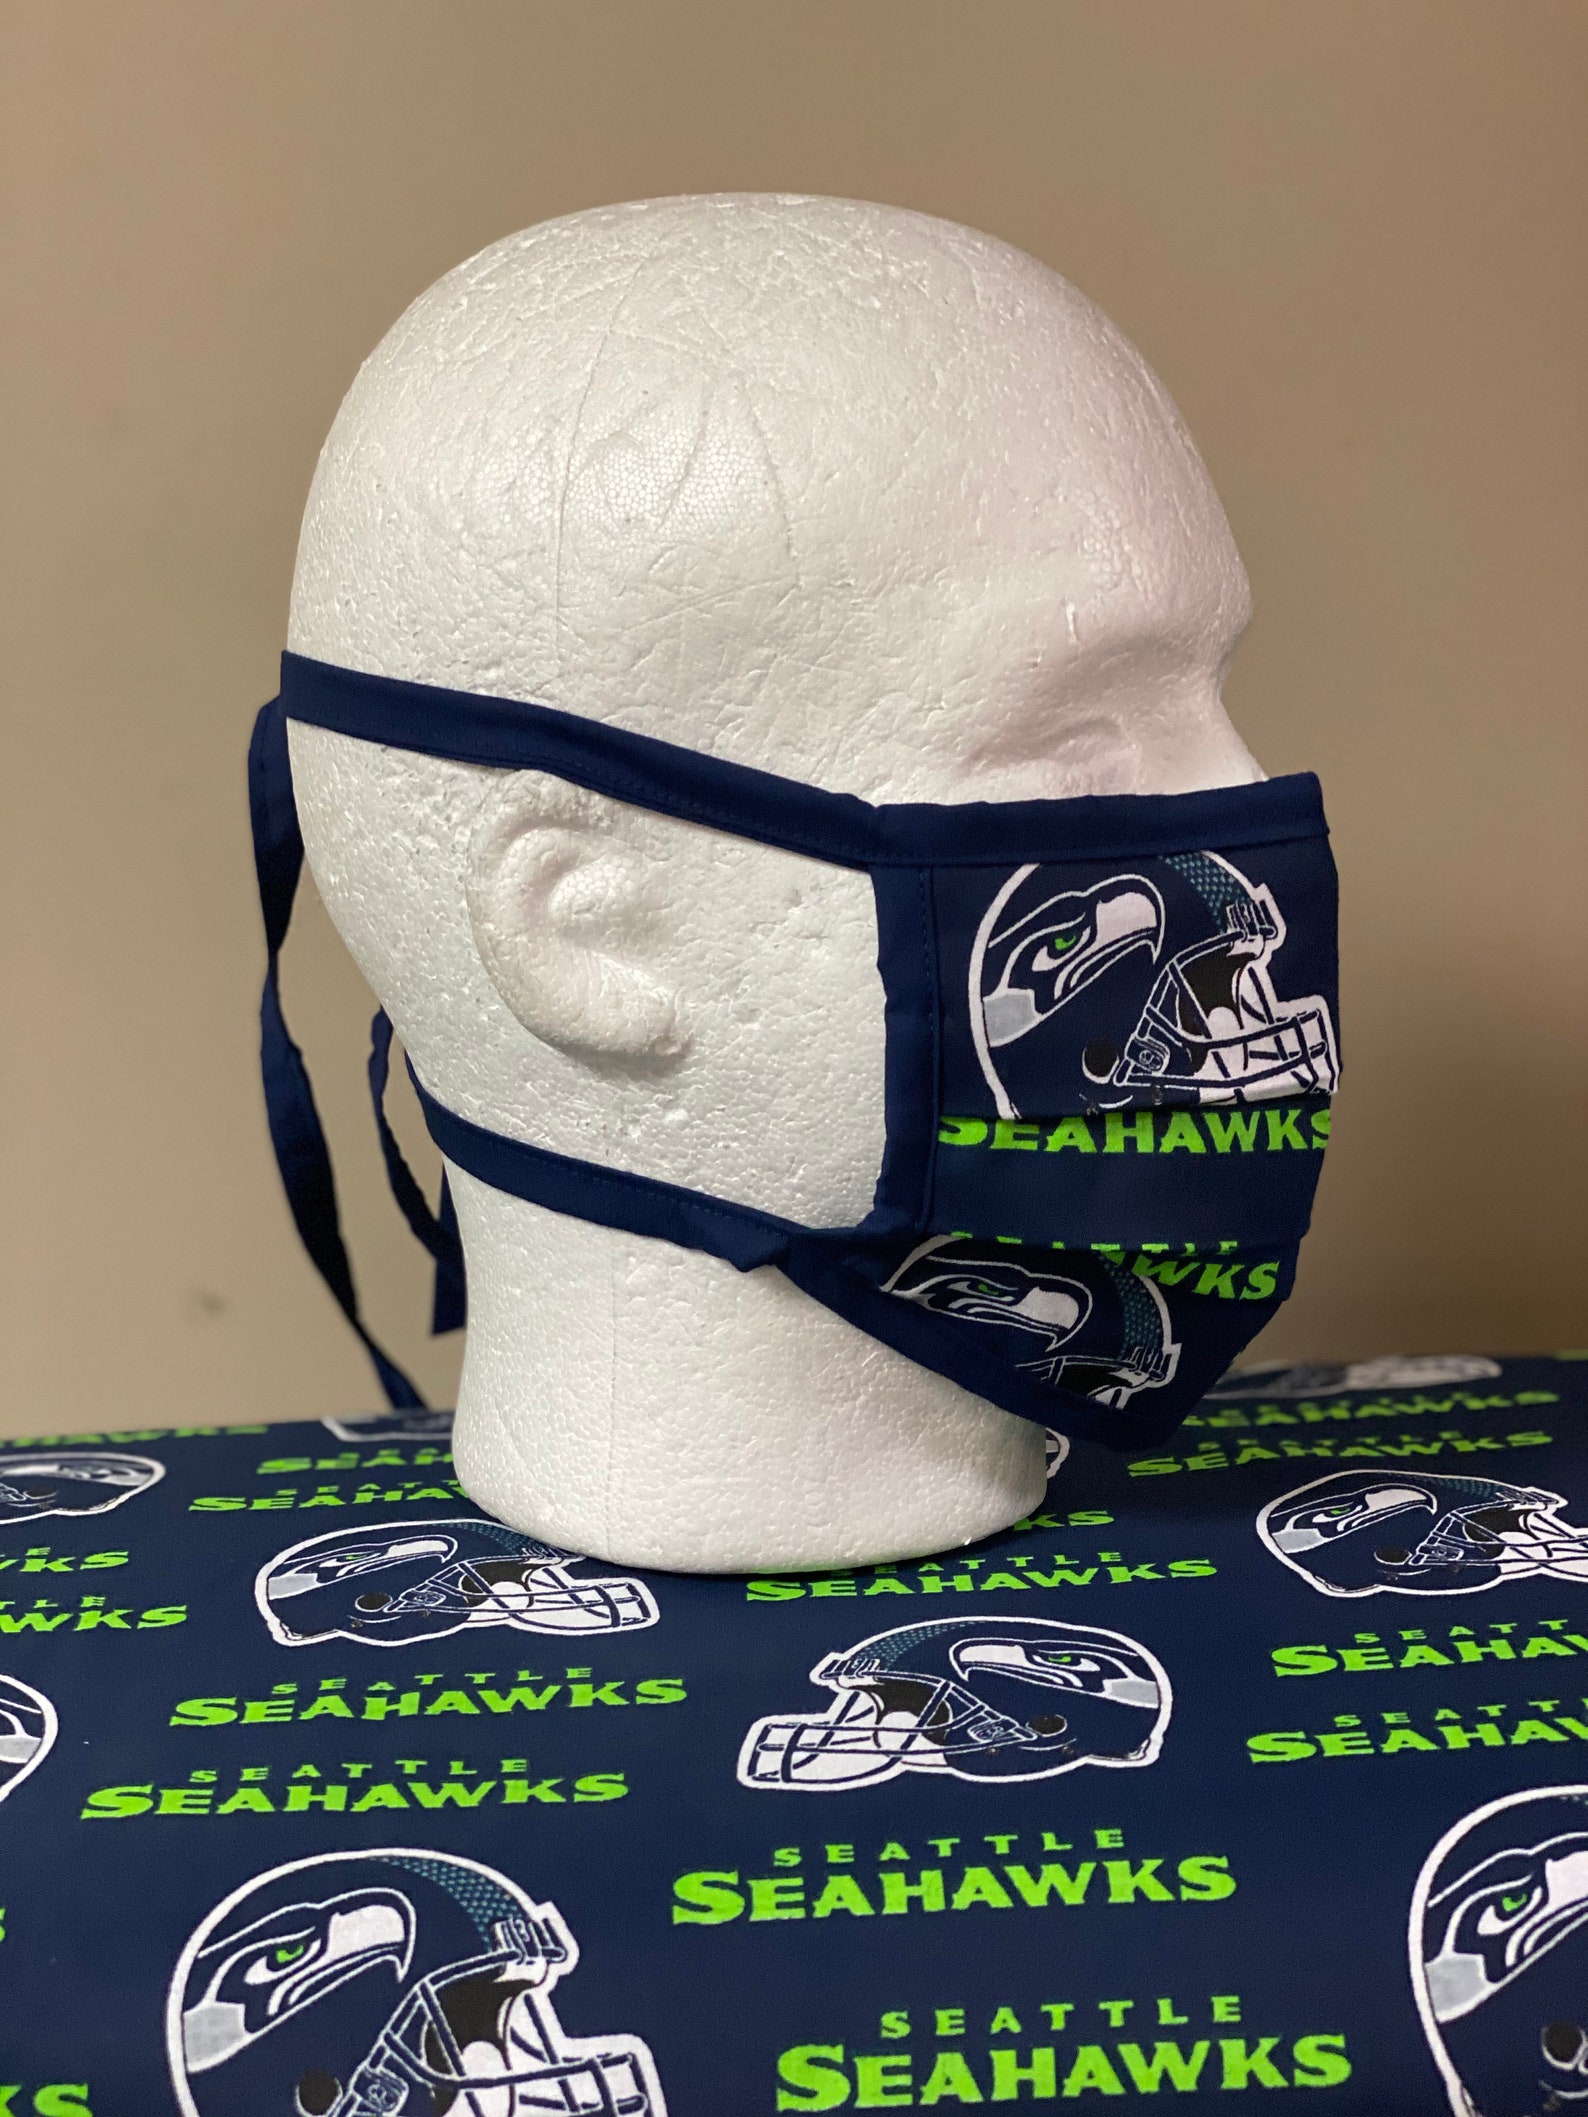 Seattle Seahawks Face Mask With Nose Wire Tie Straps Etsy